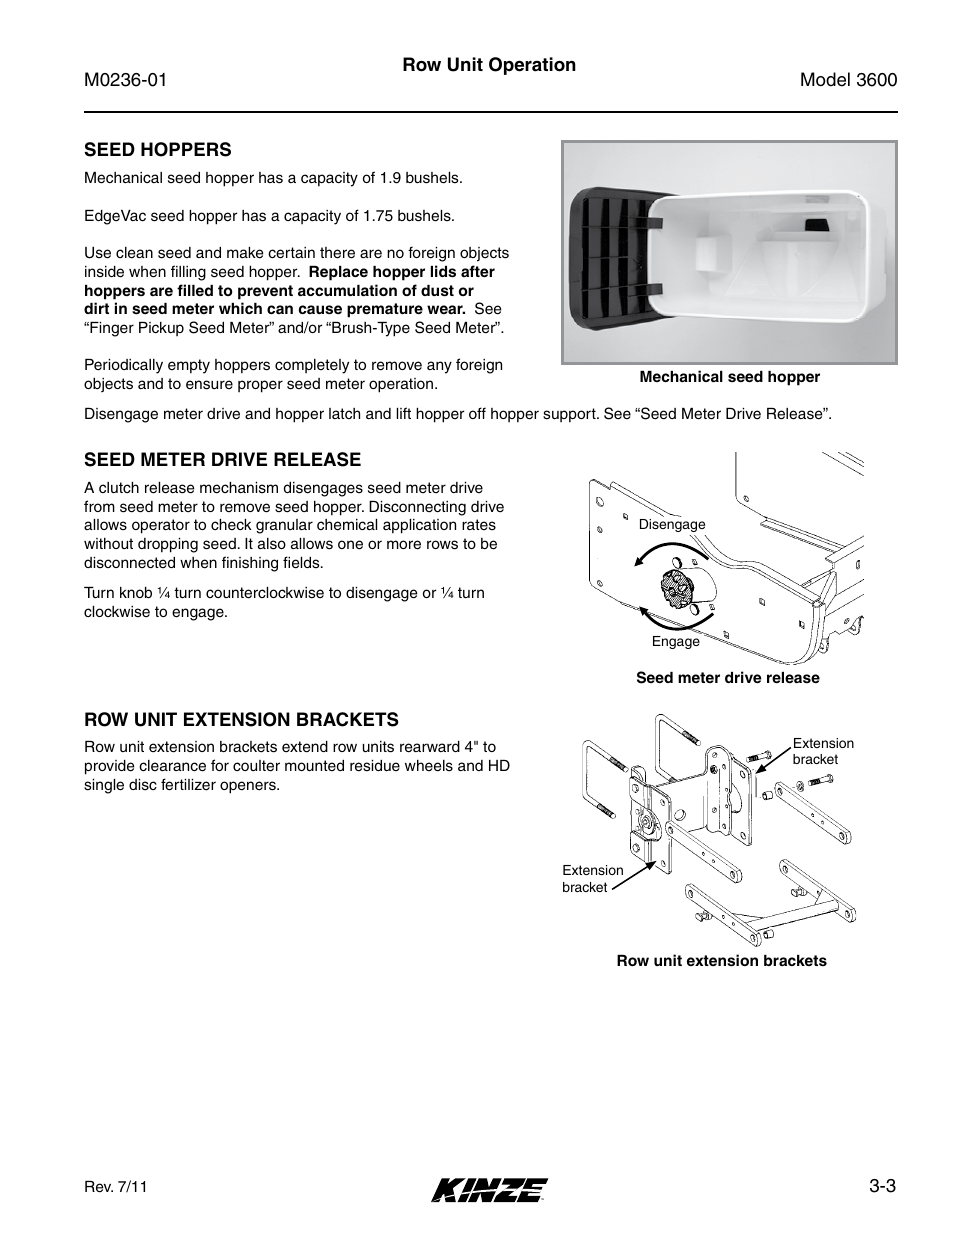 Seed hoppers, Seed meter drive release, Row unit extension brackets | Seed hoppers -3, Seed meter drive release -3, Row unit extension brackets -3 | Kinze 3600 Lift and Rotate Planter Rev. 7/14 User Manual | Page 47 / 172